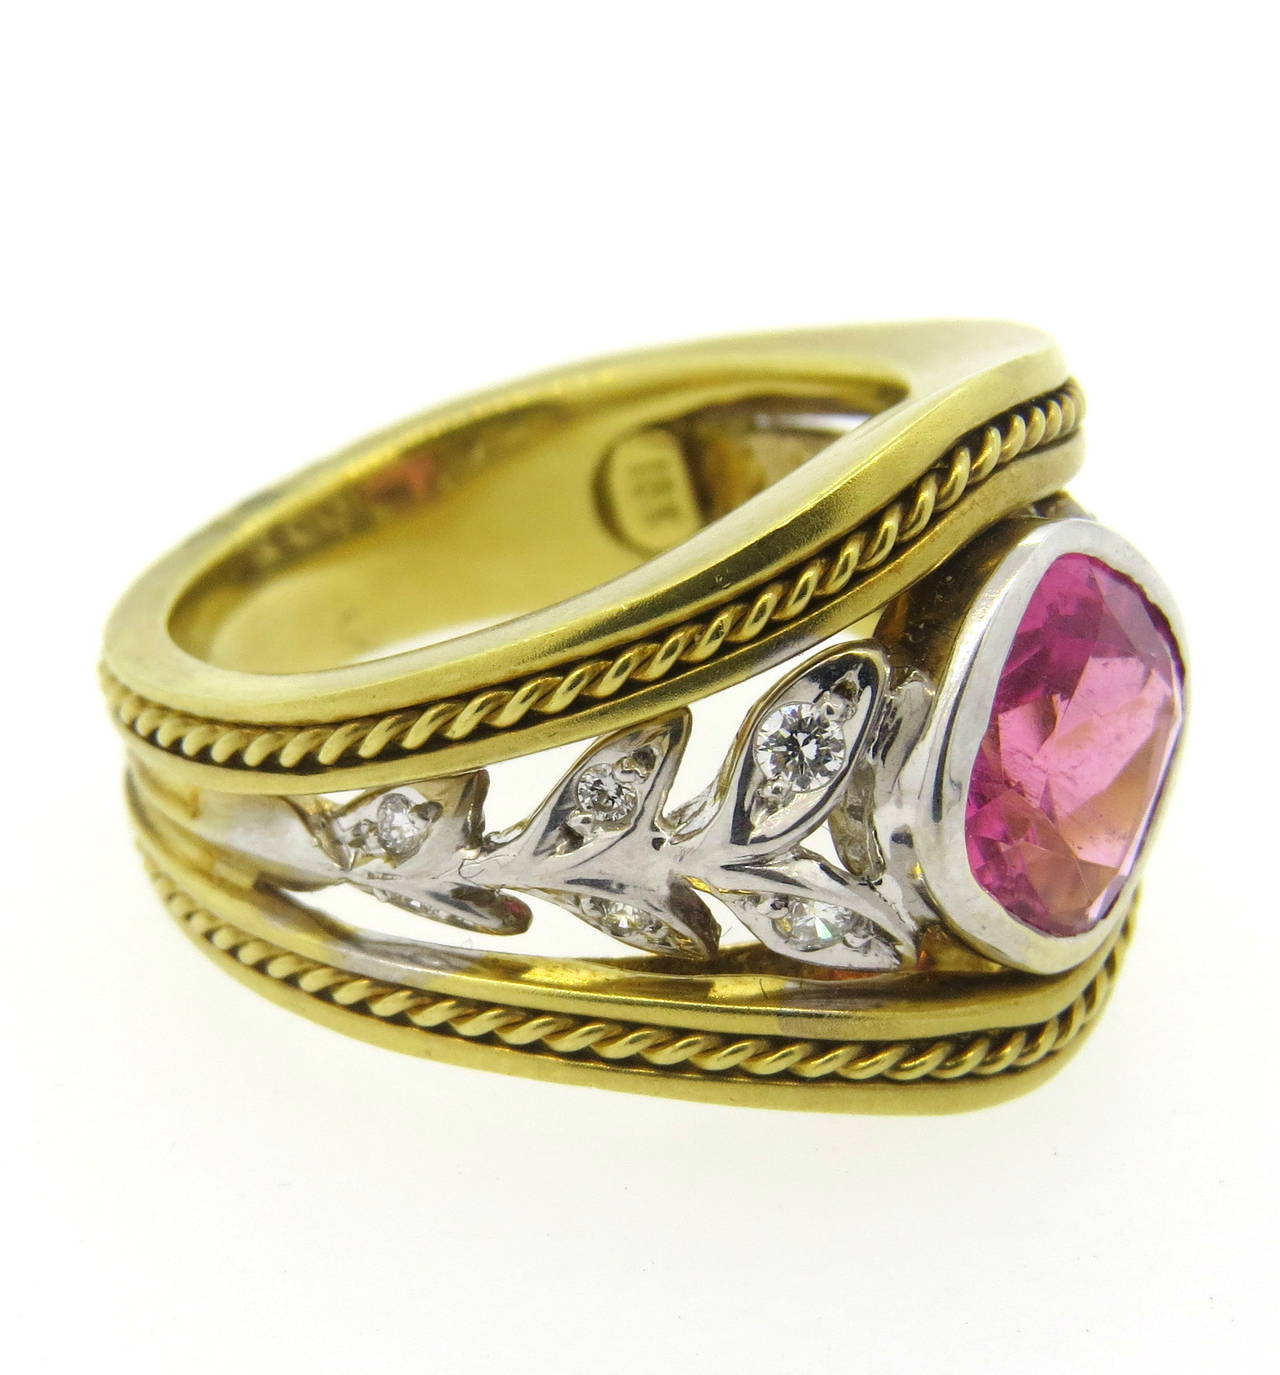 18k gold ring by Seidengang, featuring pink tourmaline in the center, surrounded with approx. 0.12ctw in diamonds. Ring is a size 6 3/4, ring is 16.5mm at widest point. Marked SG and 18k. Weight - 12.6 grams